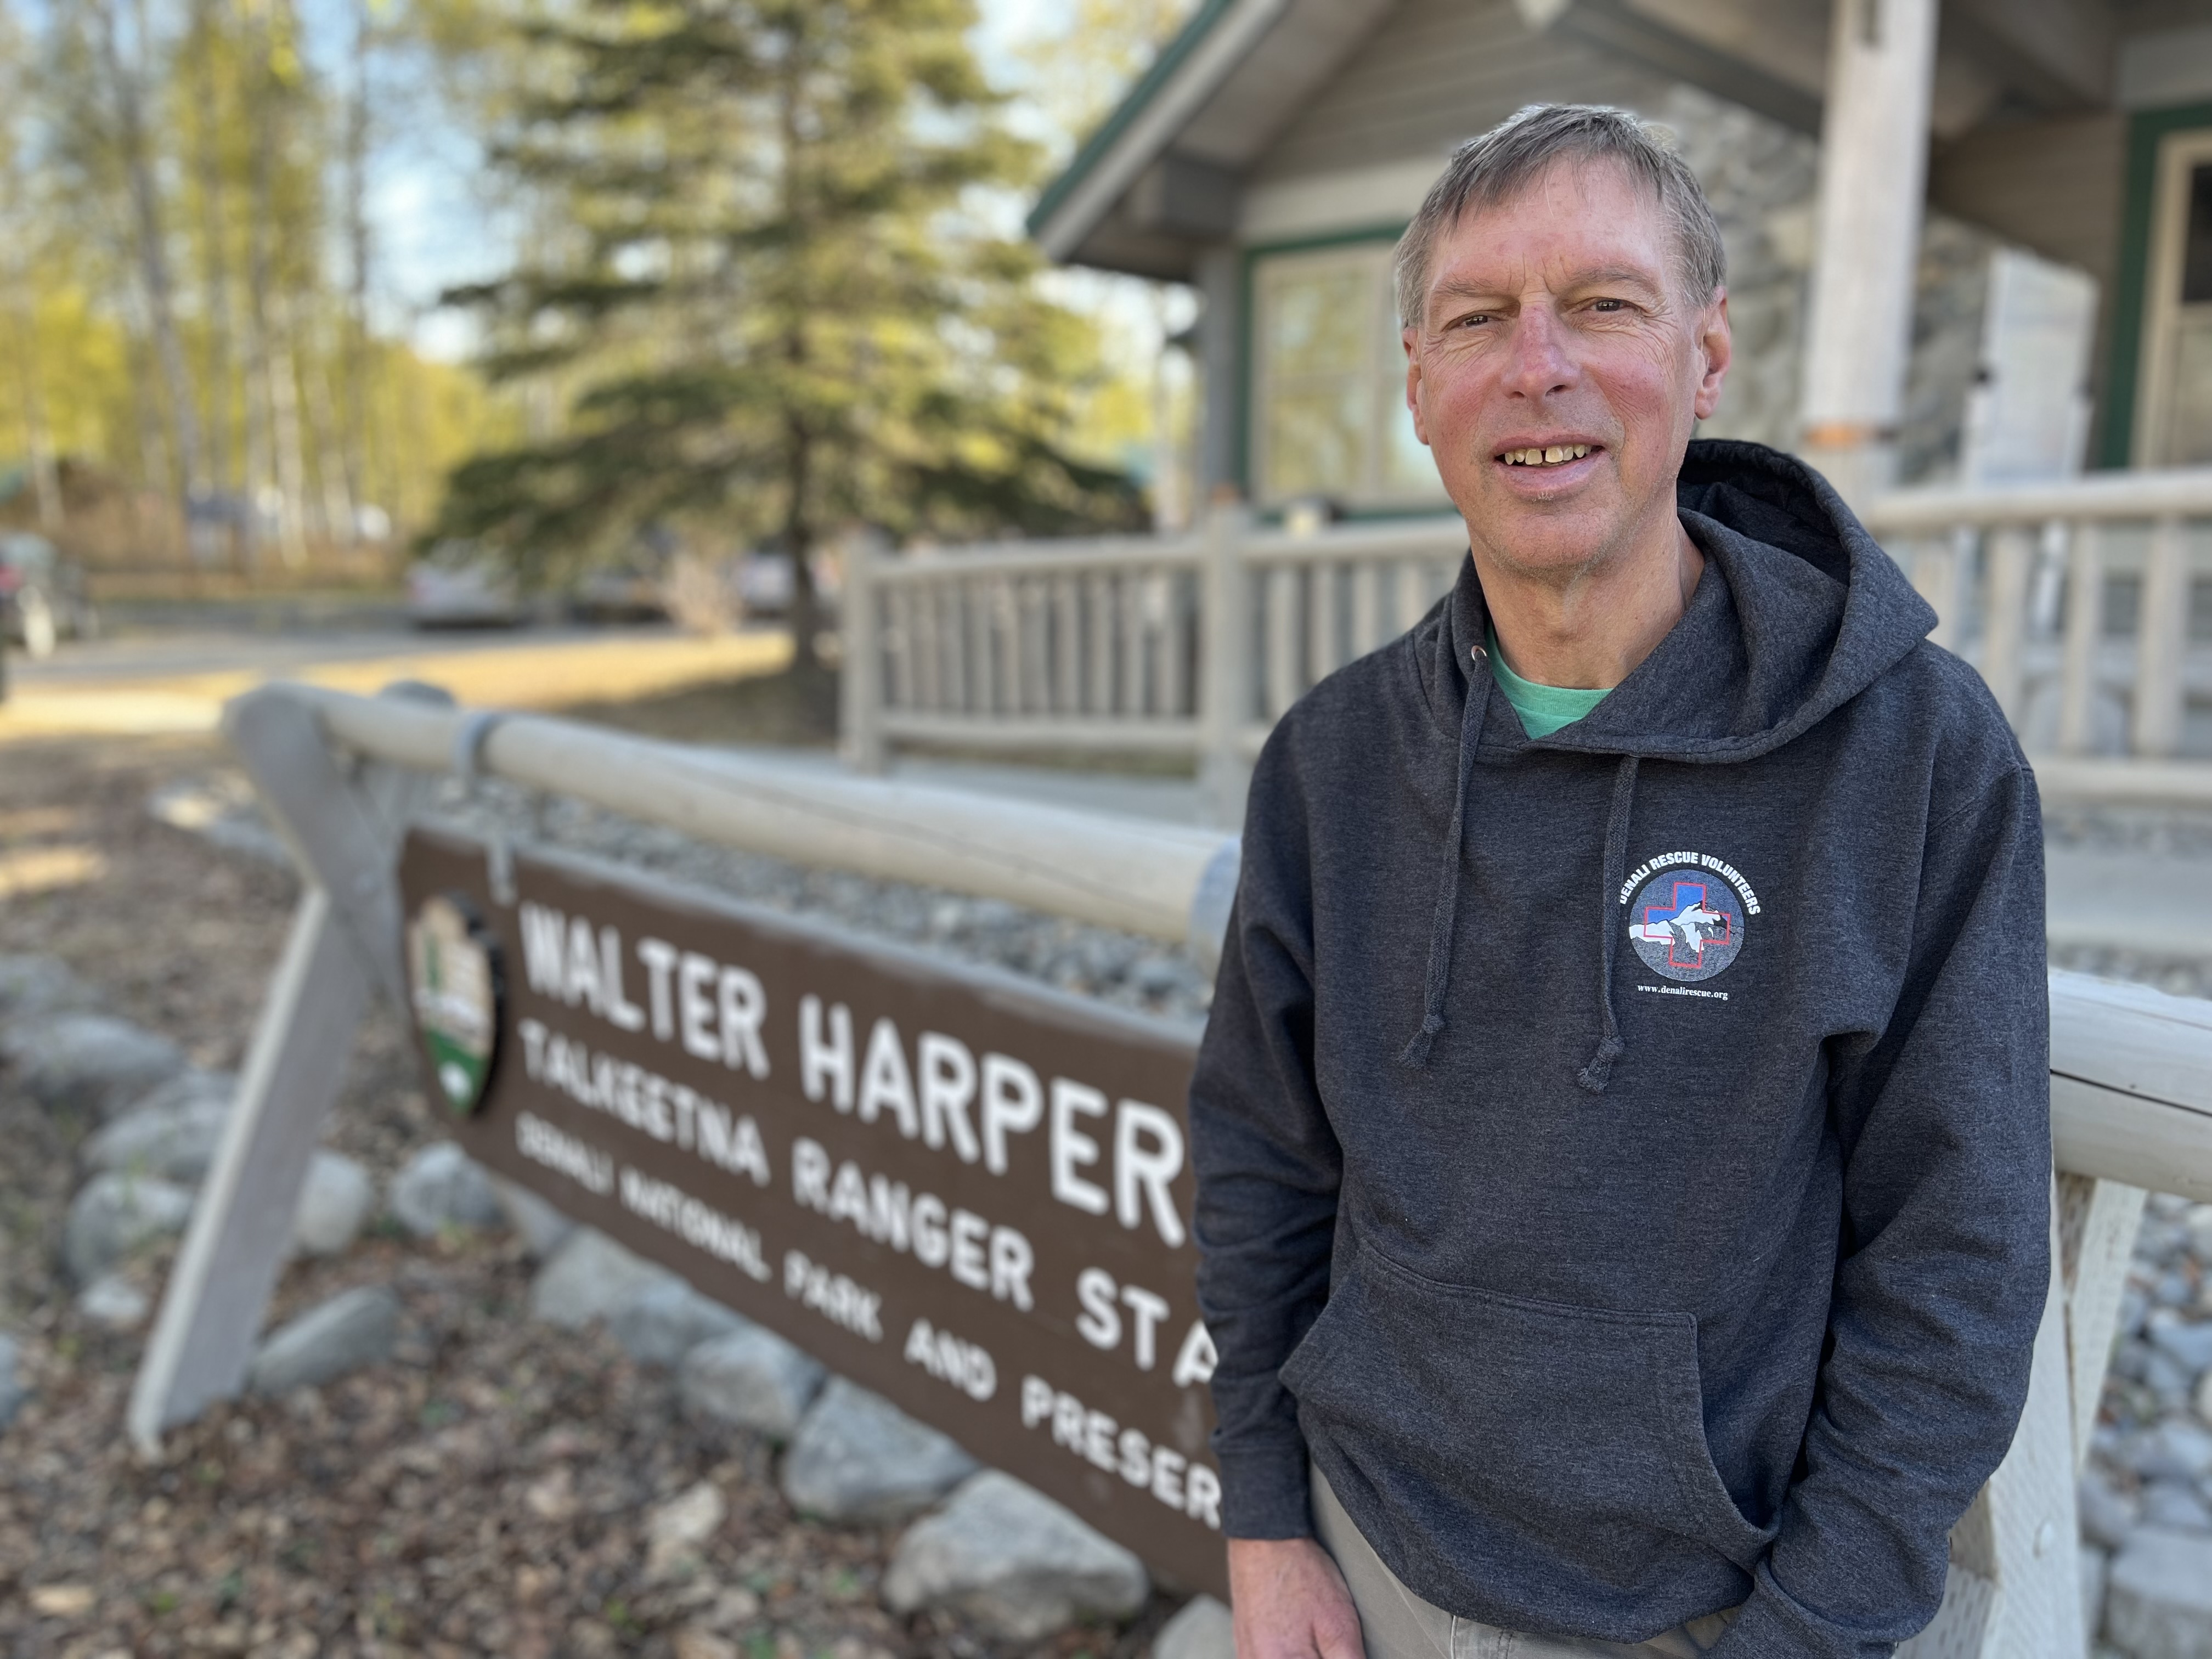 A man standing outdoors next to the ranger station sign